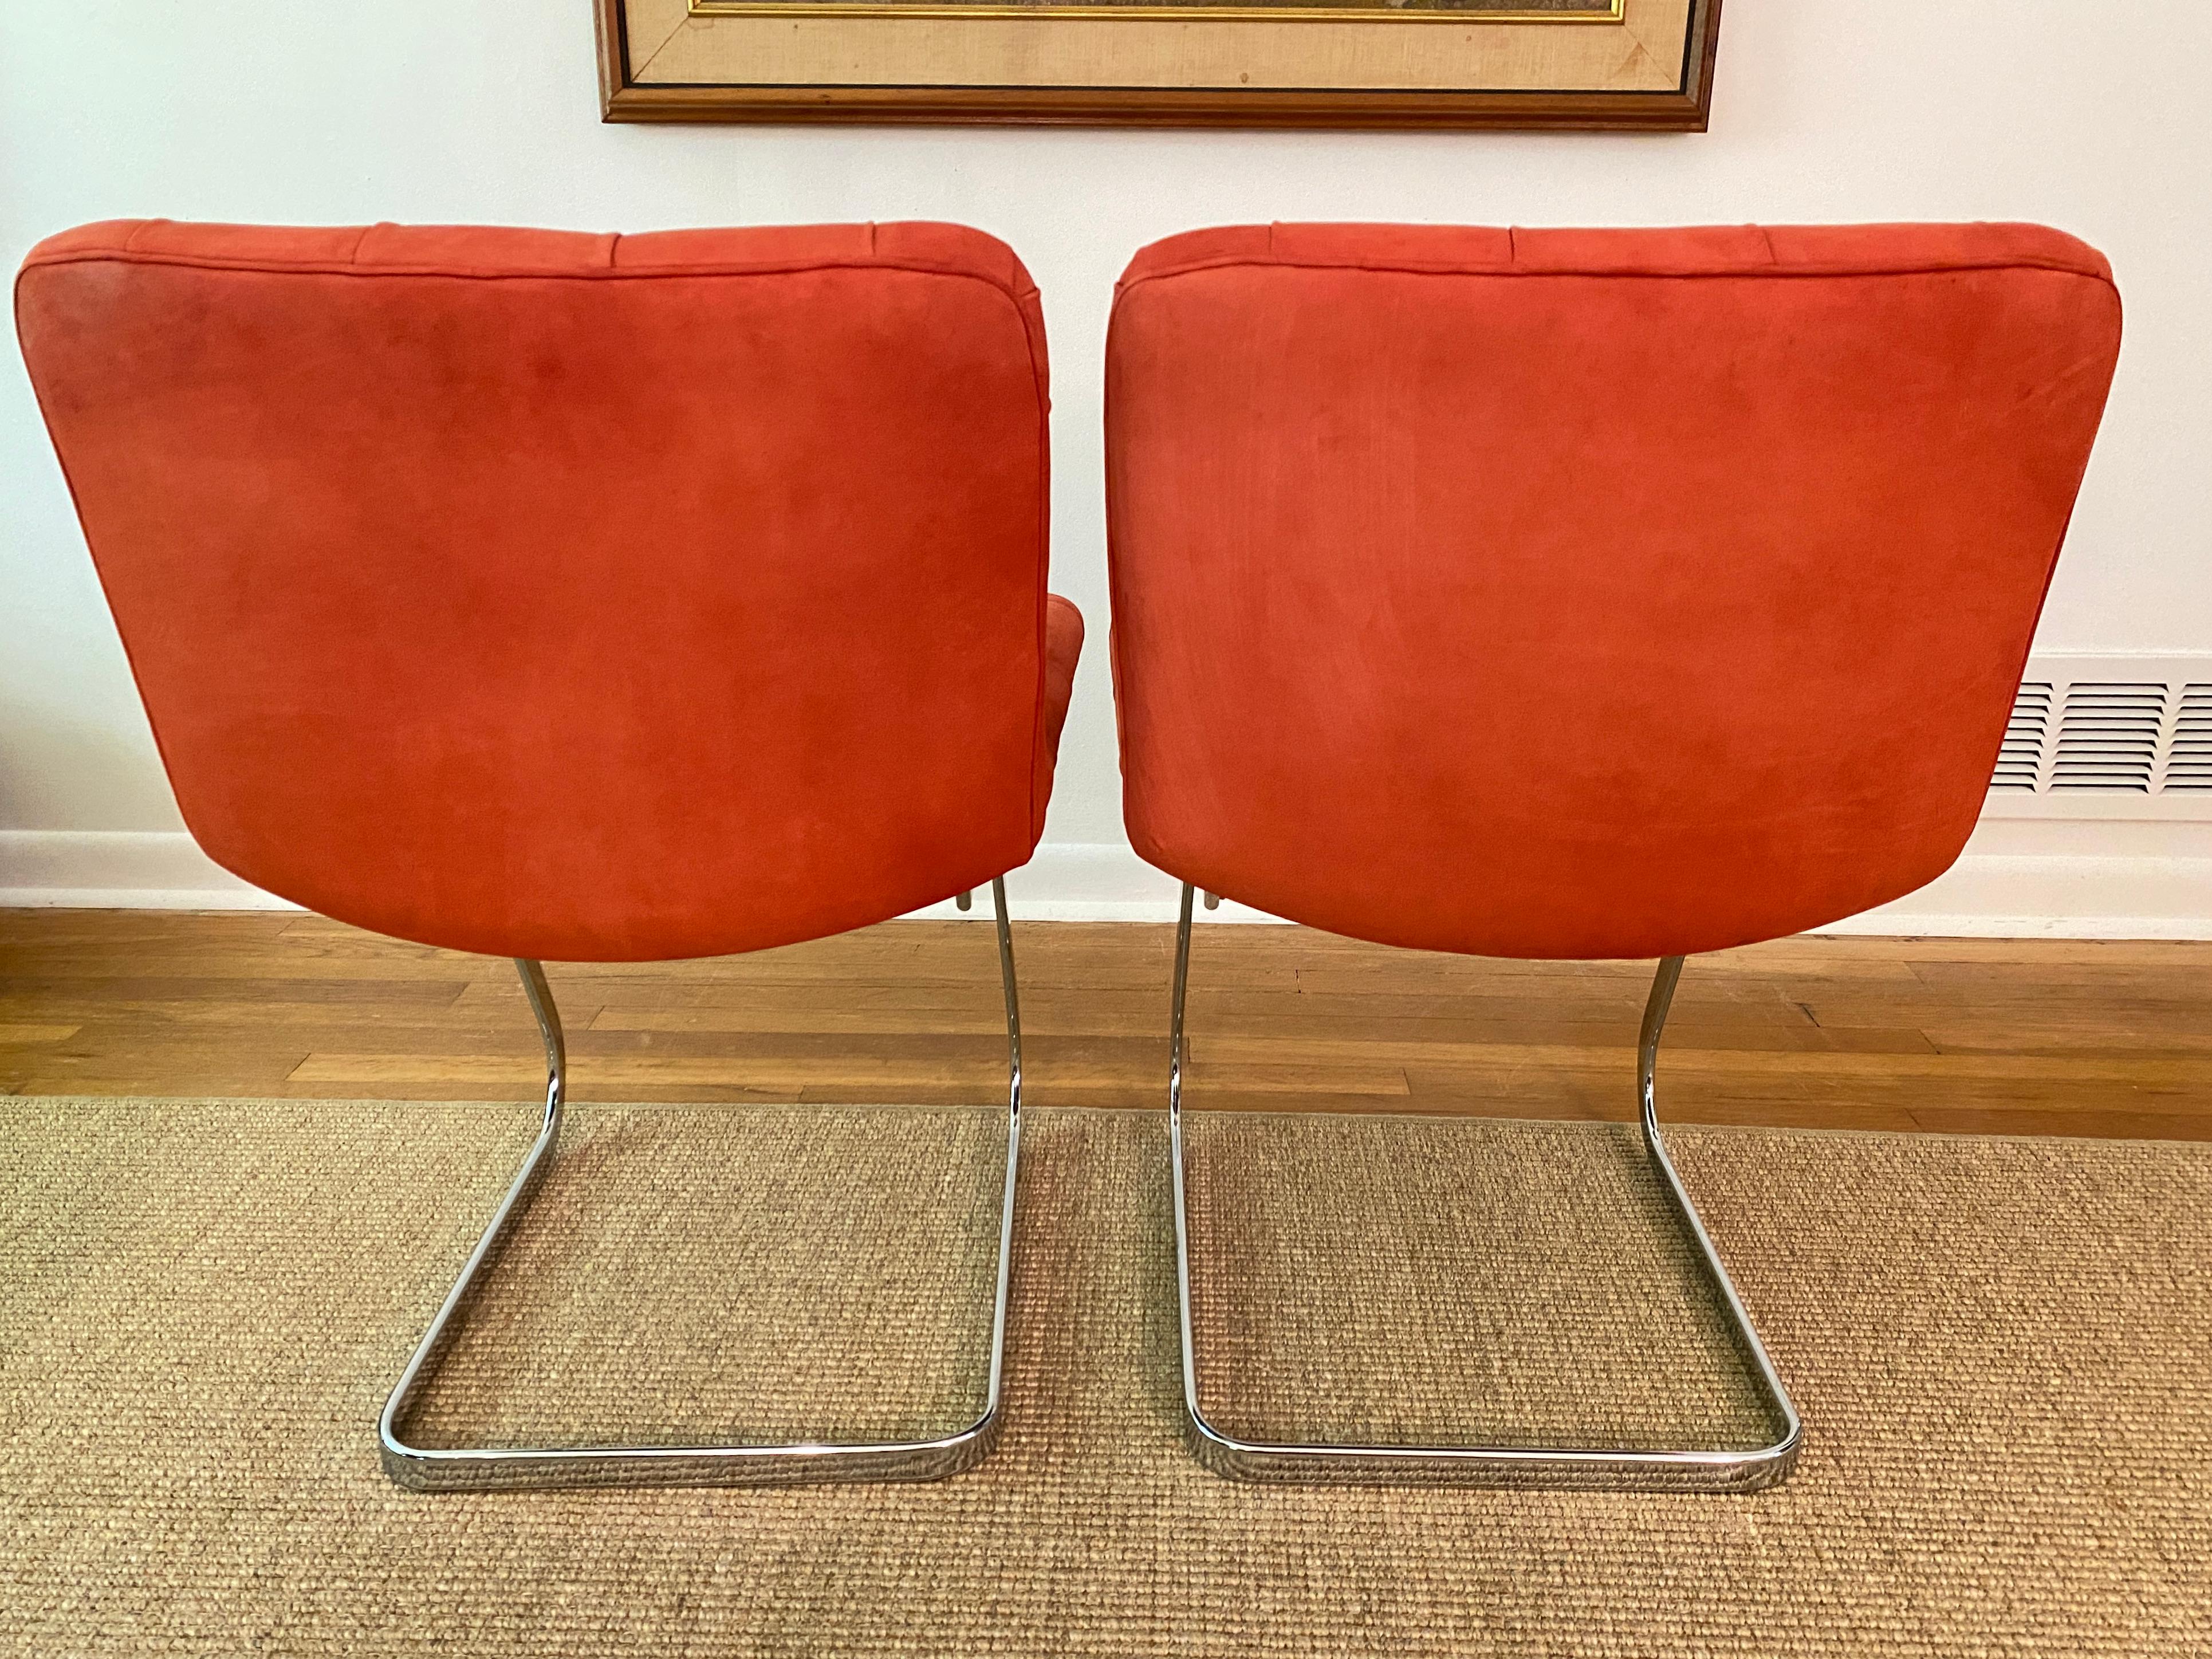 Pair Suede Leather Cantilever Chairs Designed By Robert Haussmann For de Sede For Sale 9